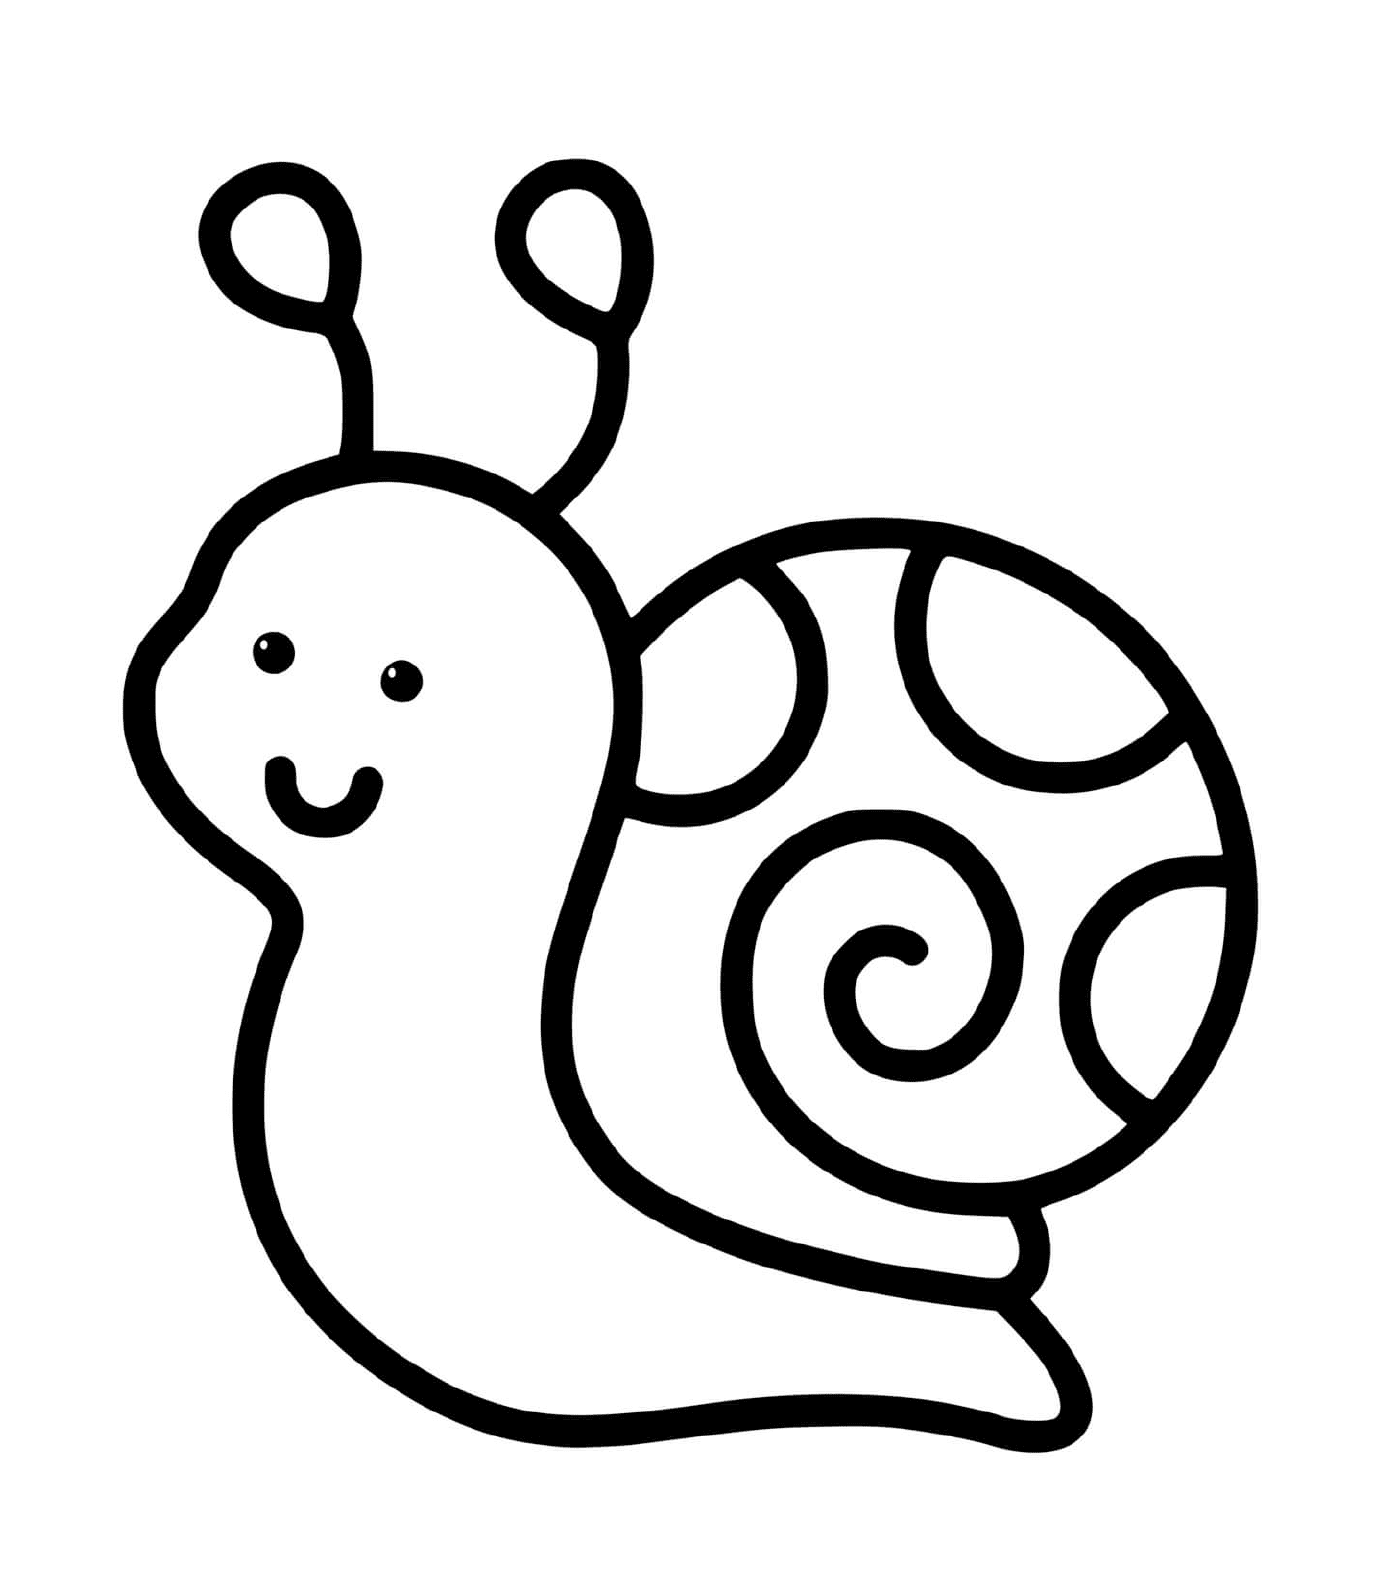  An easy to draw snail for 2-year-olds 